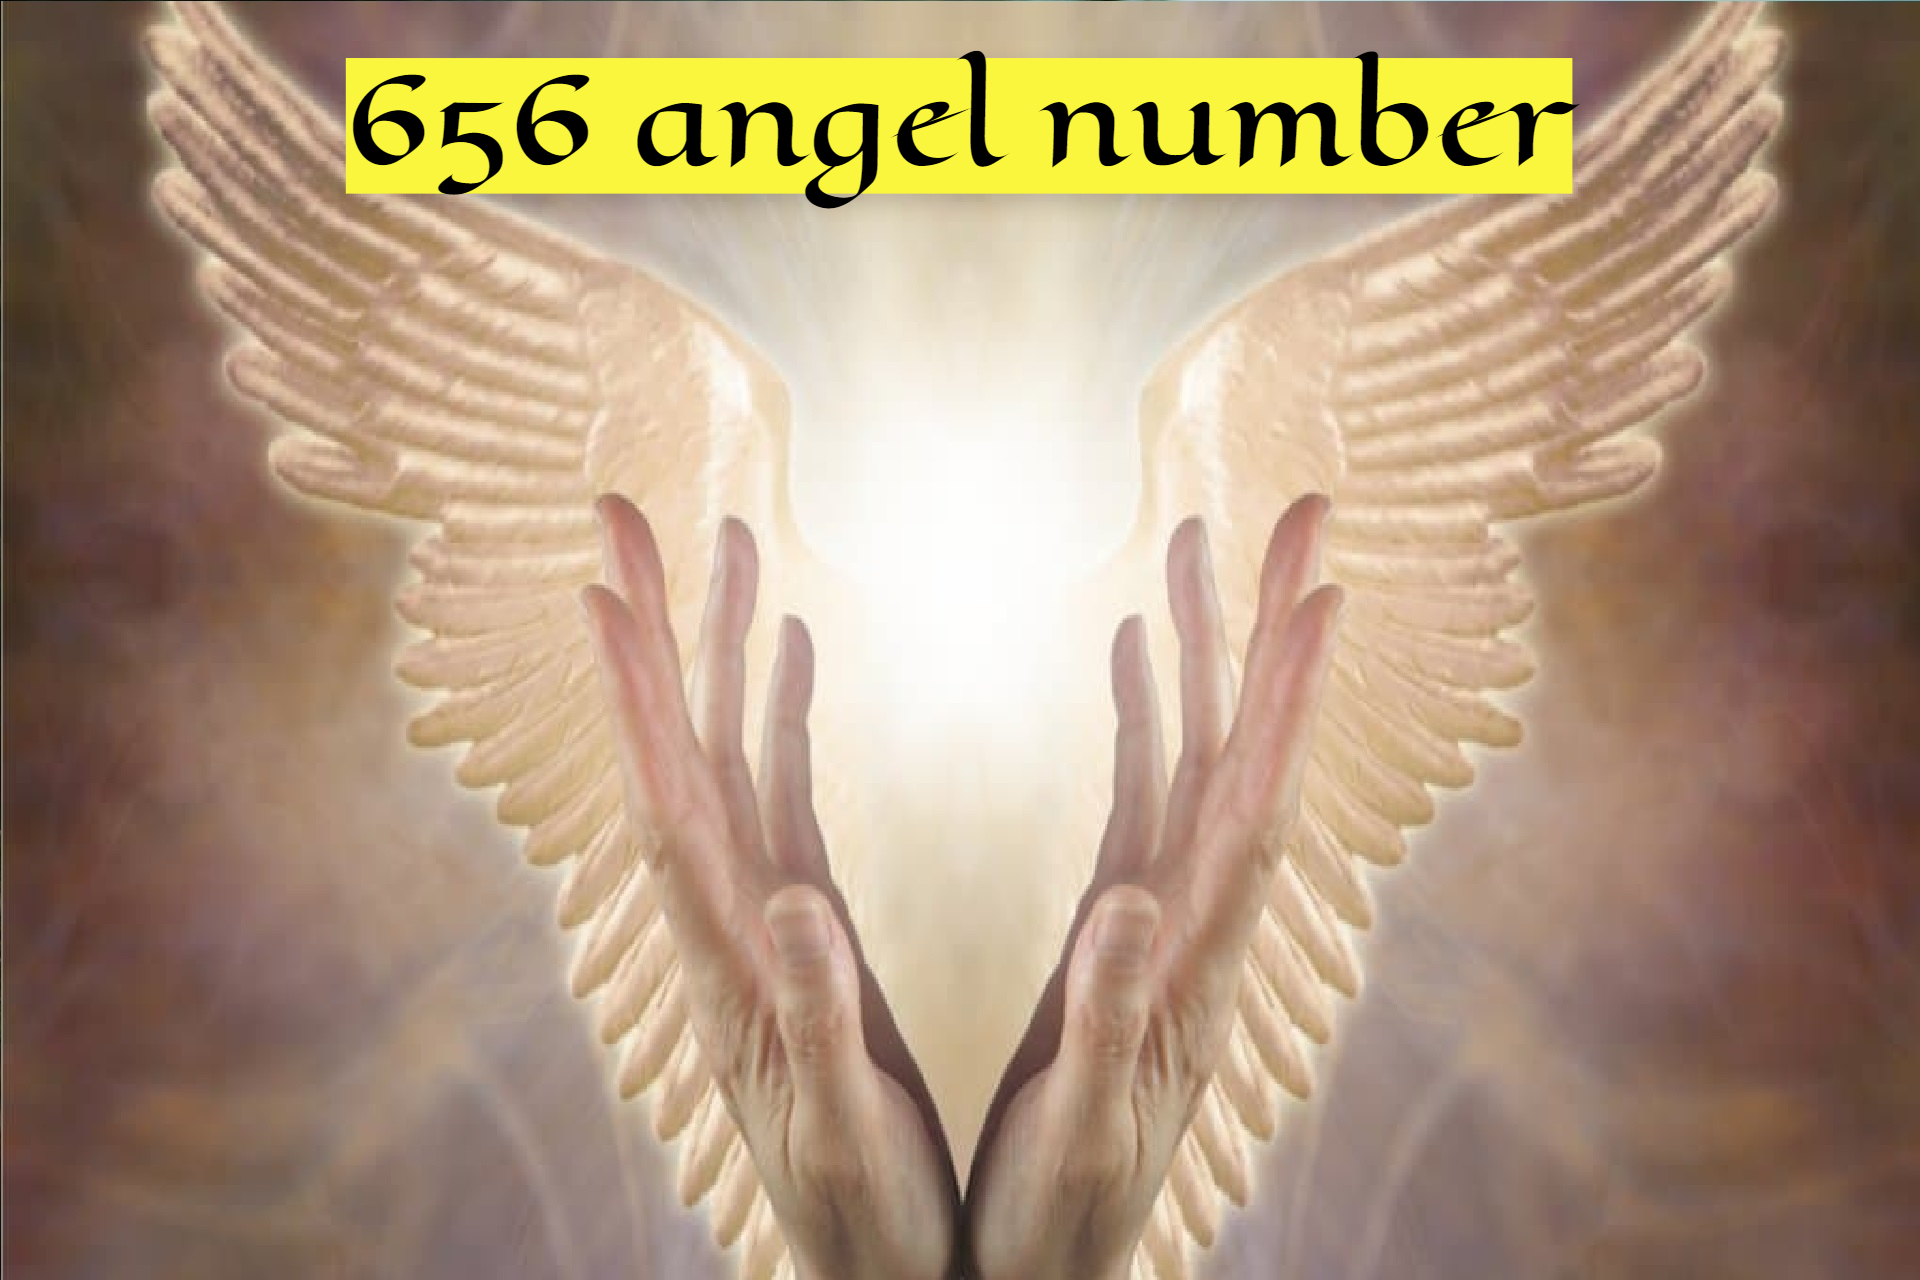 656 Angel Number - A Positive Omen For Your Life Path